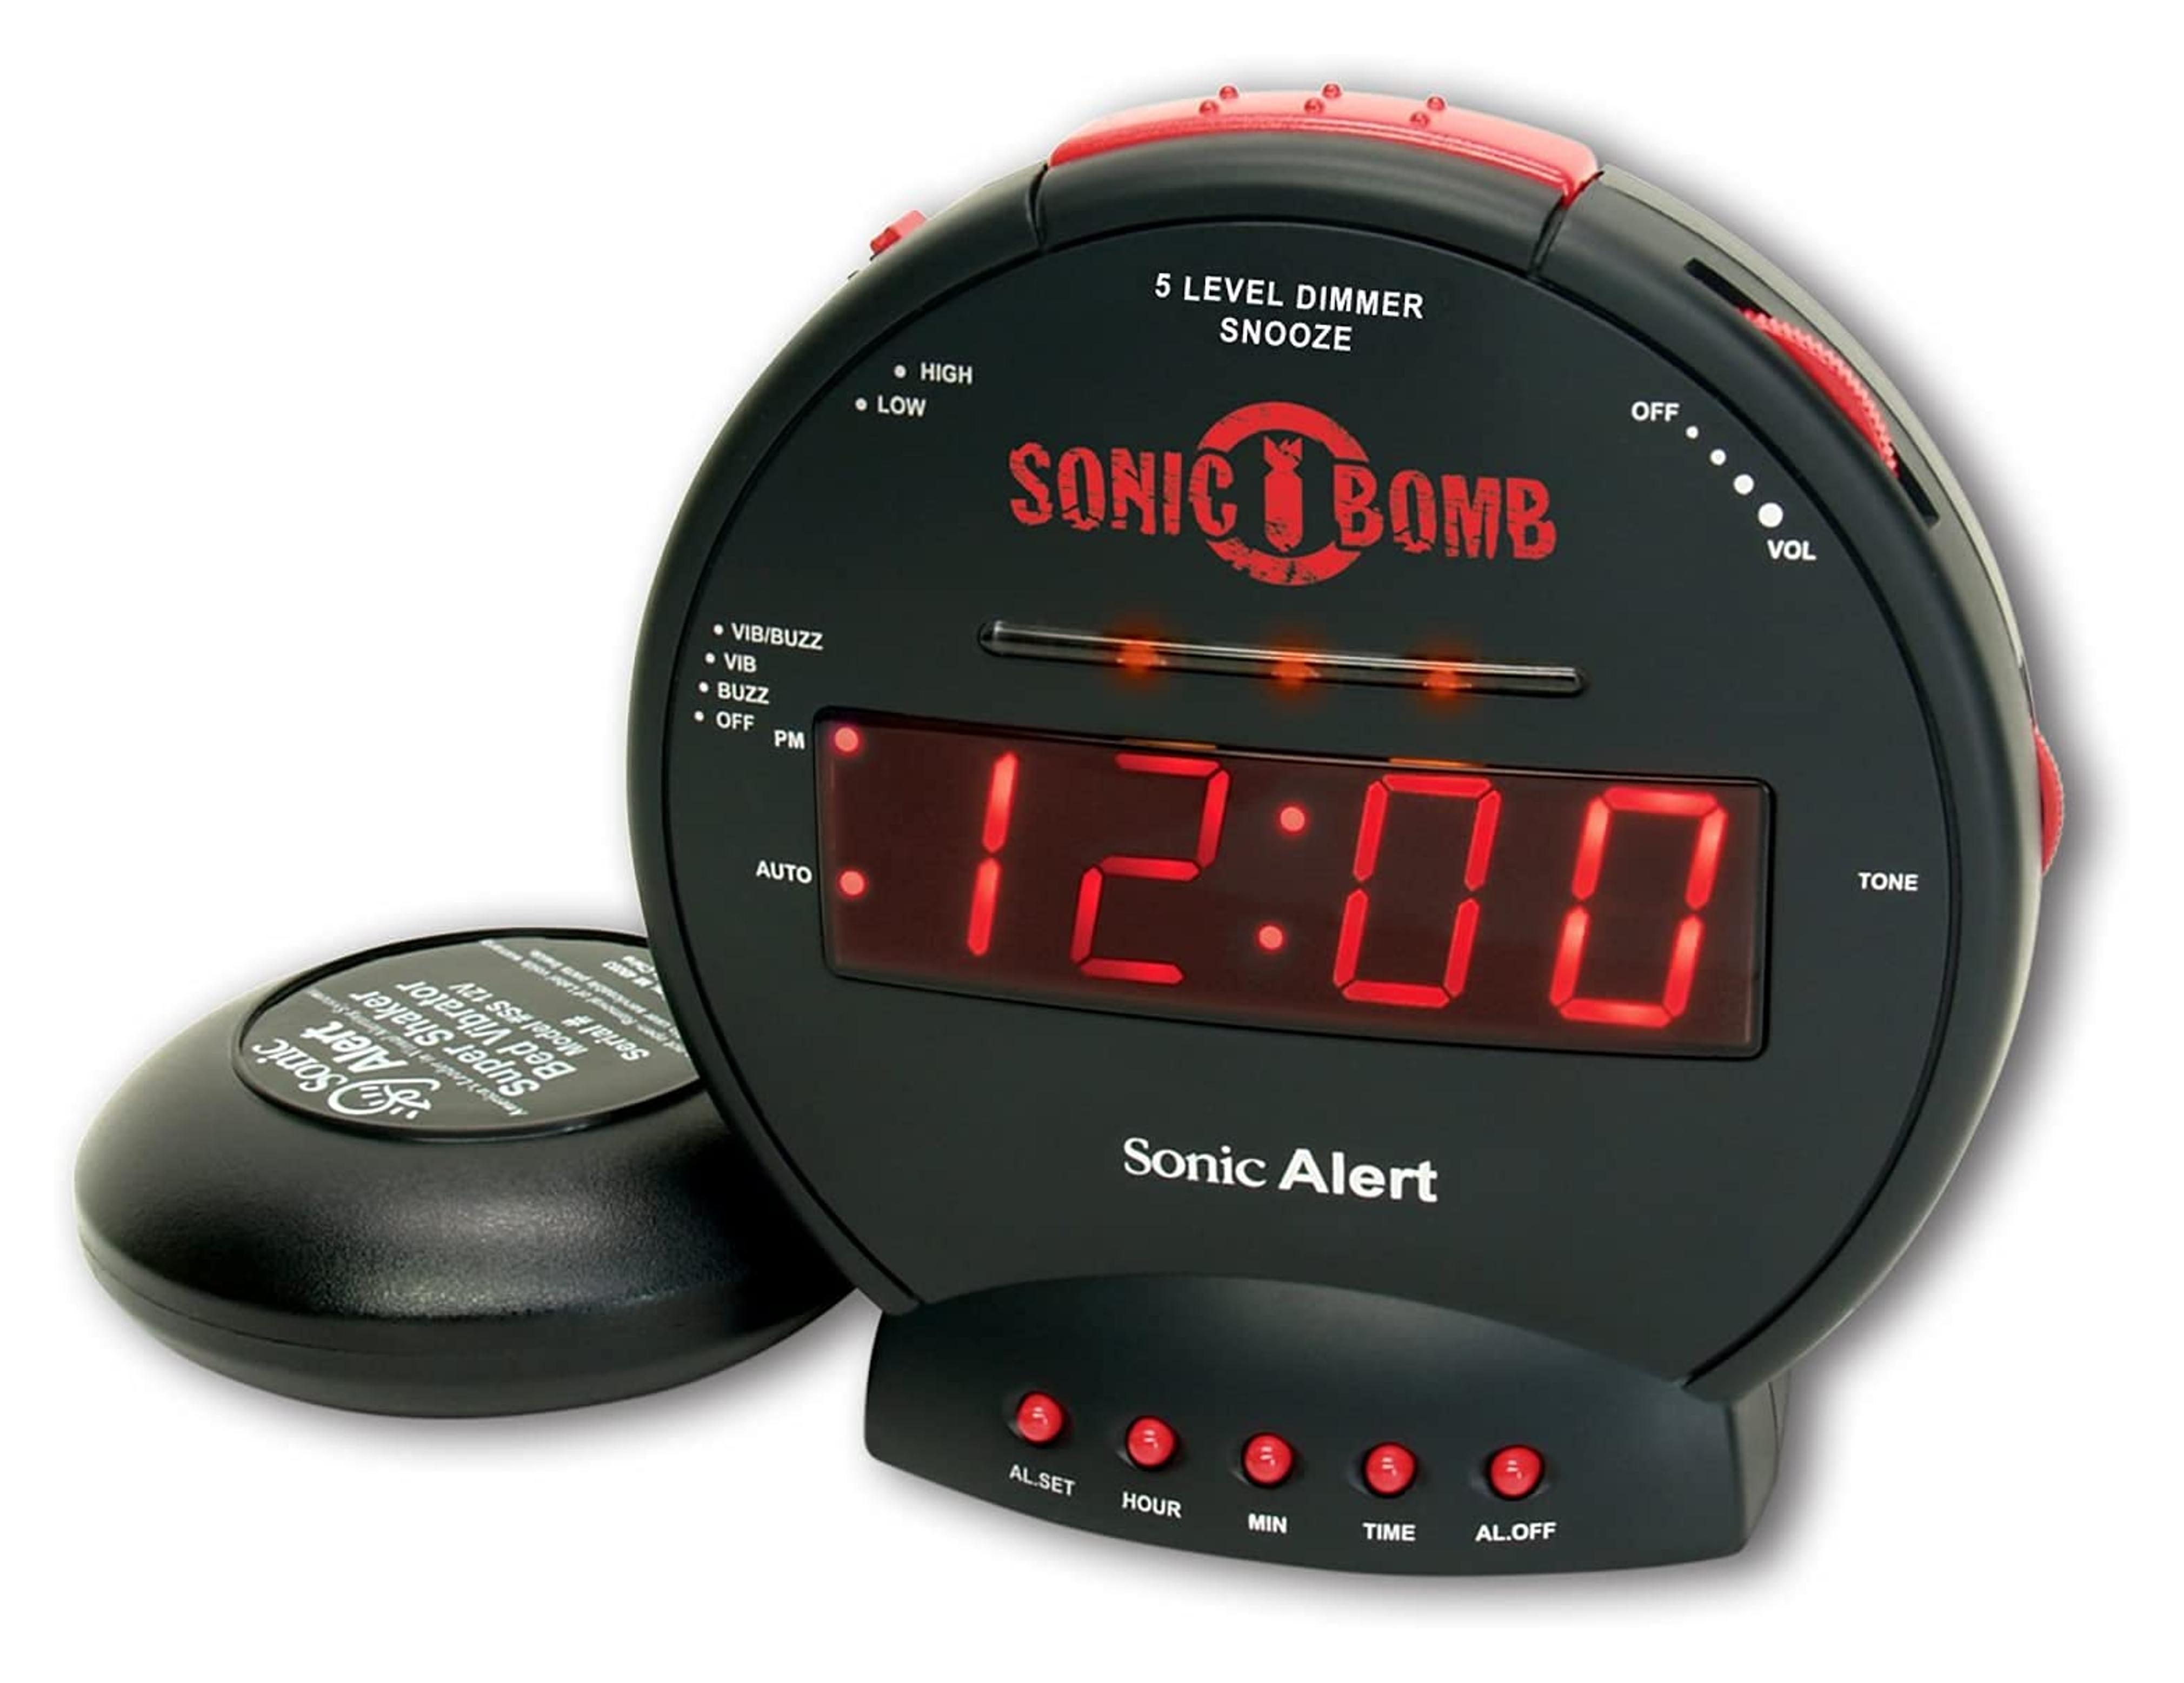 Sonic Bomb Dual Extra Loud Alarm Clock with Bed Shaker, Black • Sonic Alert Vibrating, Heavy Sleepers, Battery Backup • Wake with a Shake